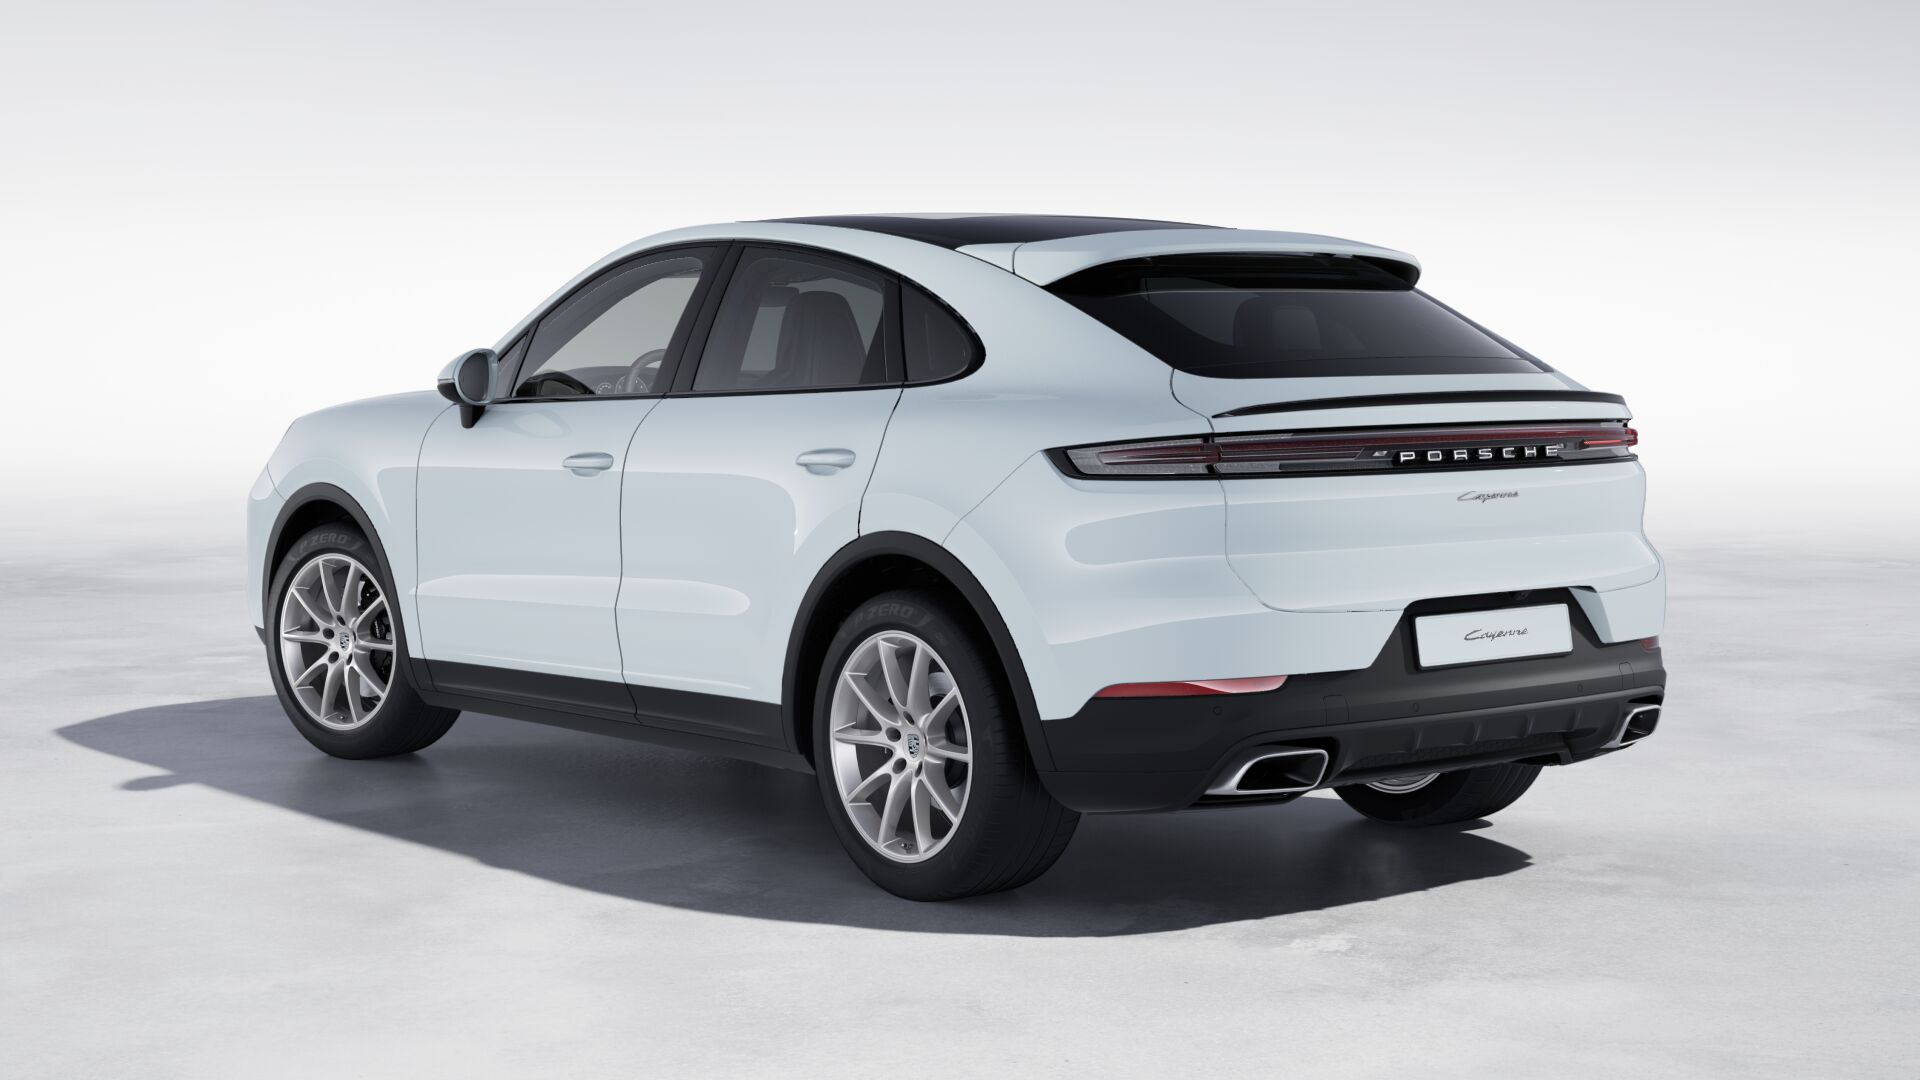 Exterior view of Cayenne Coupe